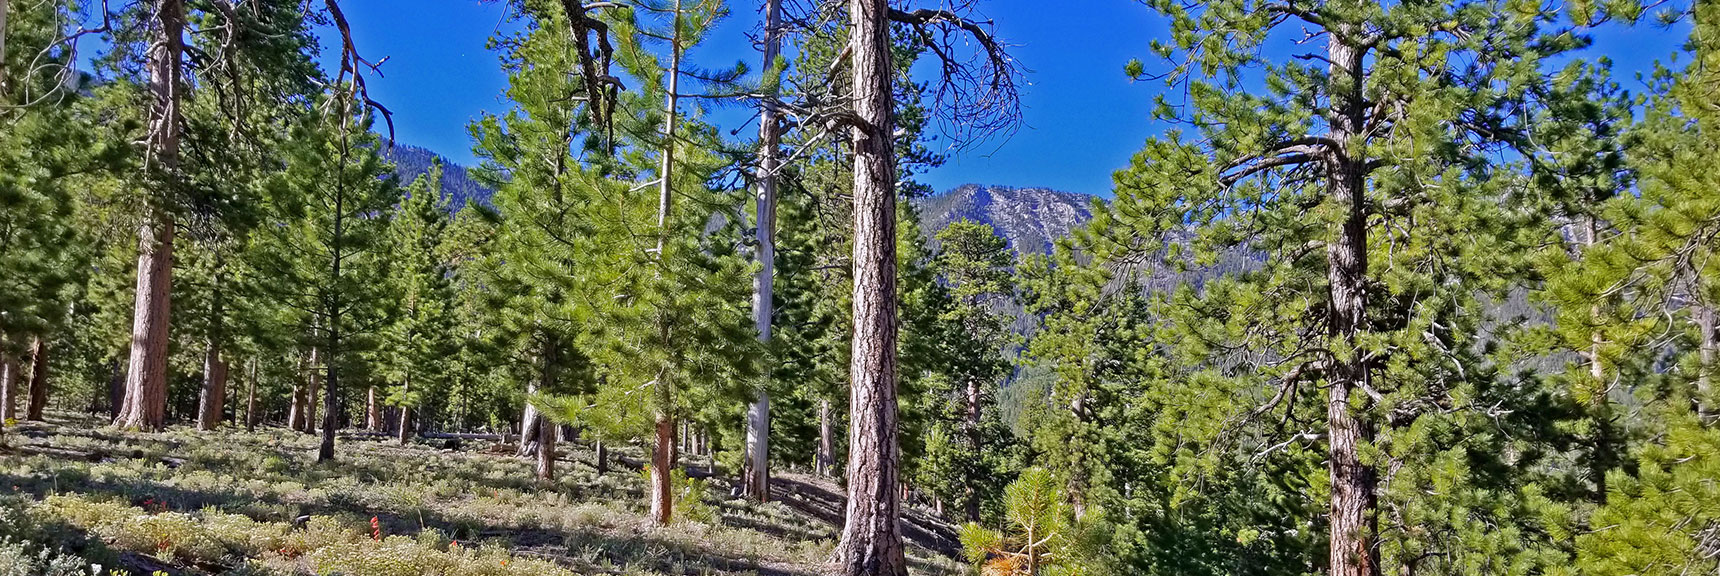 Open Forest at Top of Rise. Easy Going. | Lee to Kyle Canyon | Gradual Mid Ridge Approach | Mt. Charleston Wilderness | Spring Mountains, Nevada